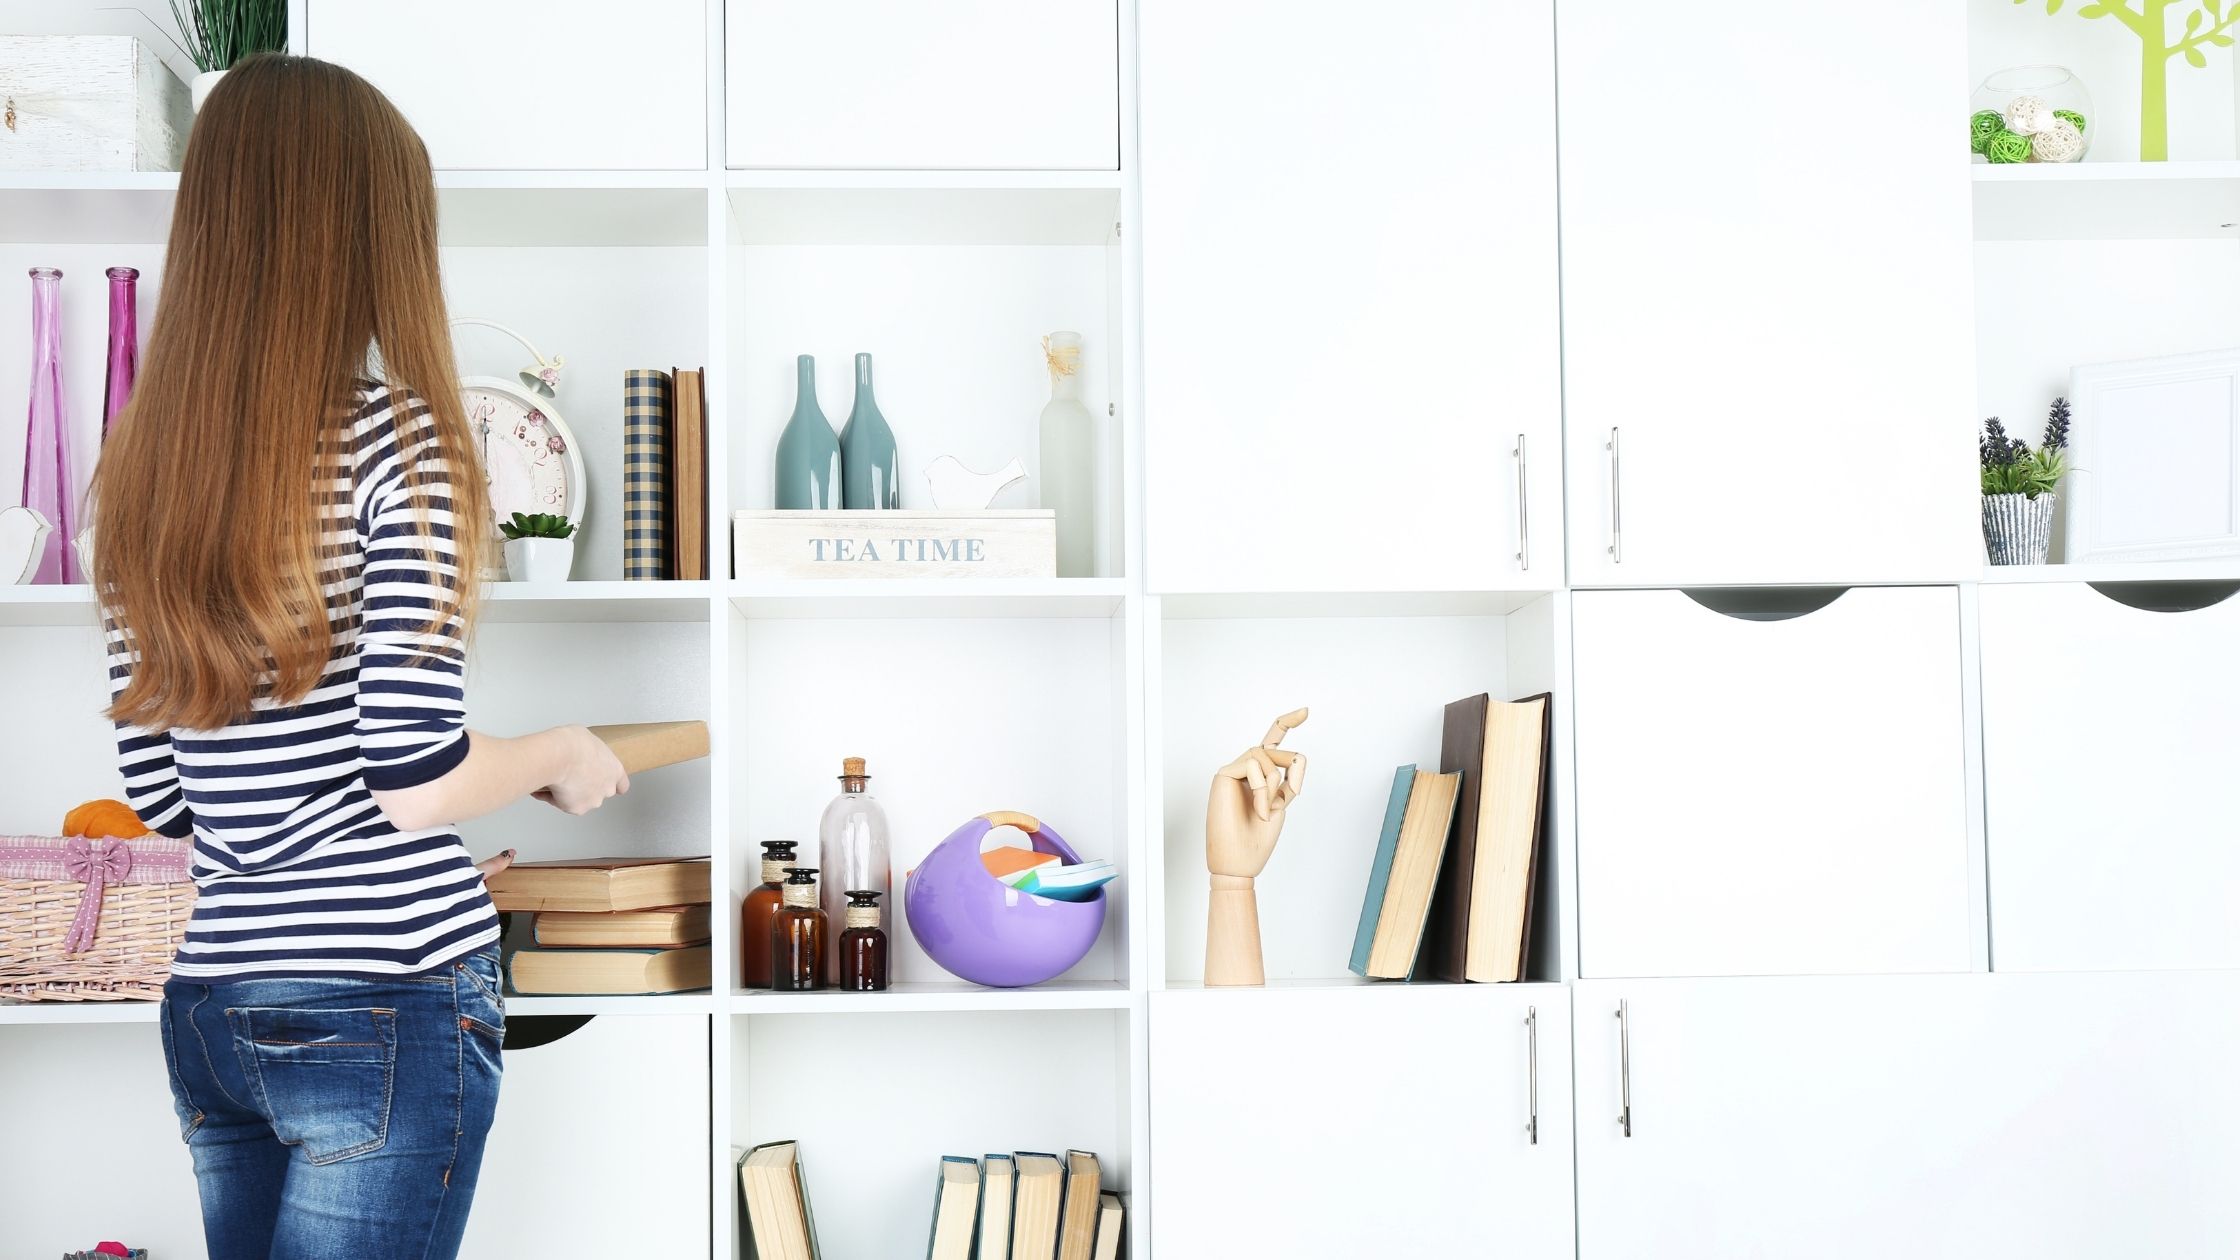 Woman standing next to shelving unit